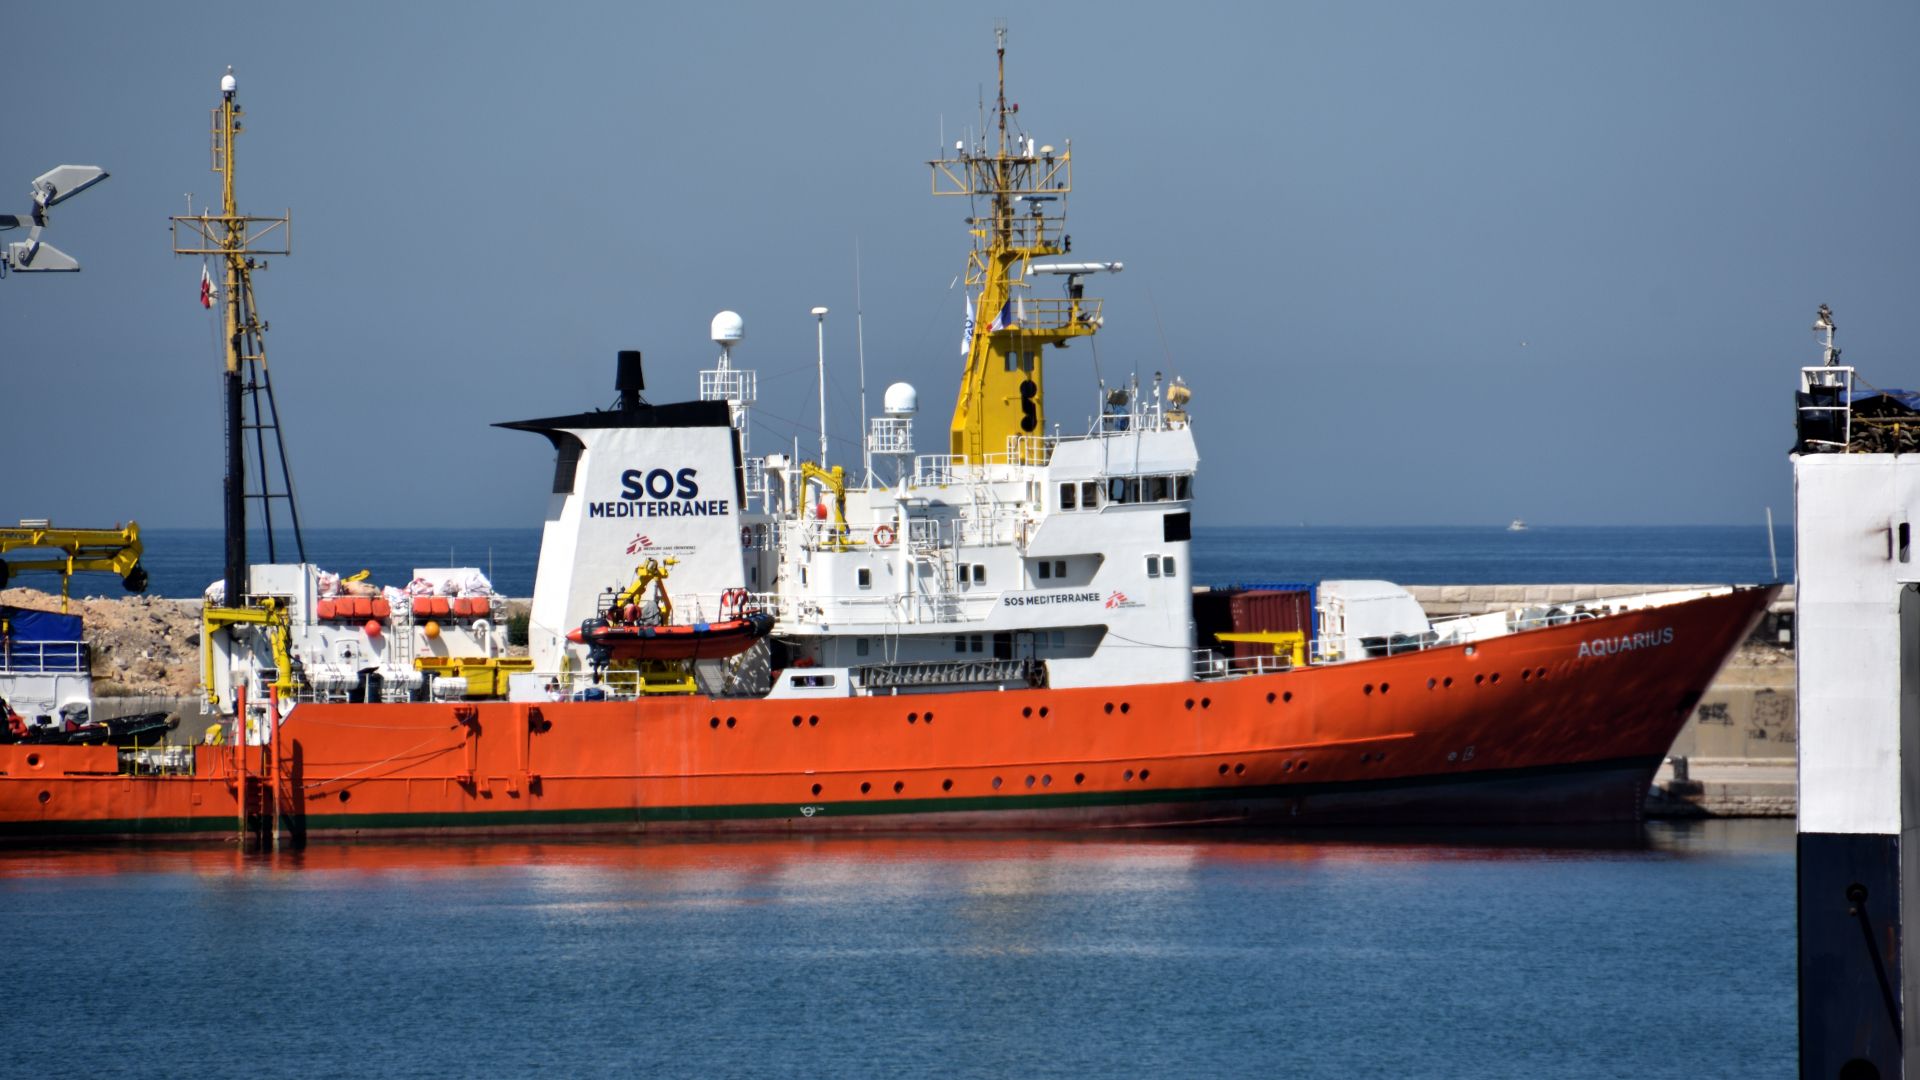 Search and rescue mediterranean NGO boat